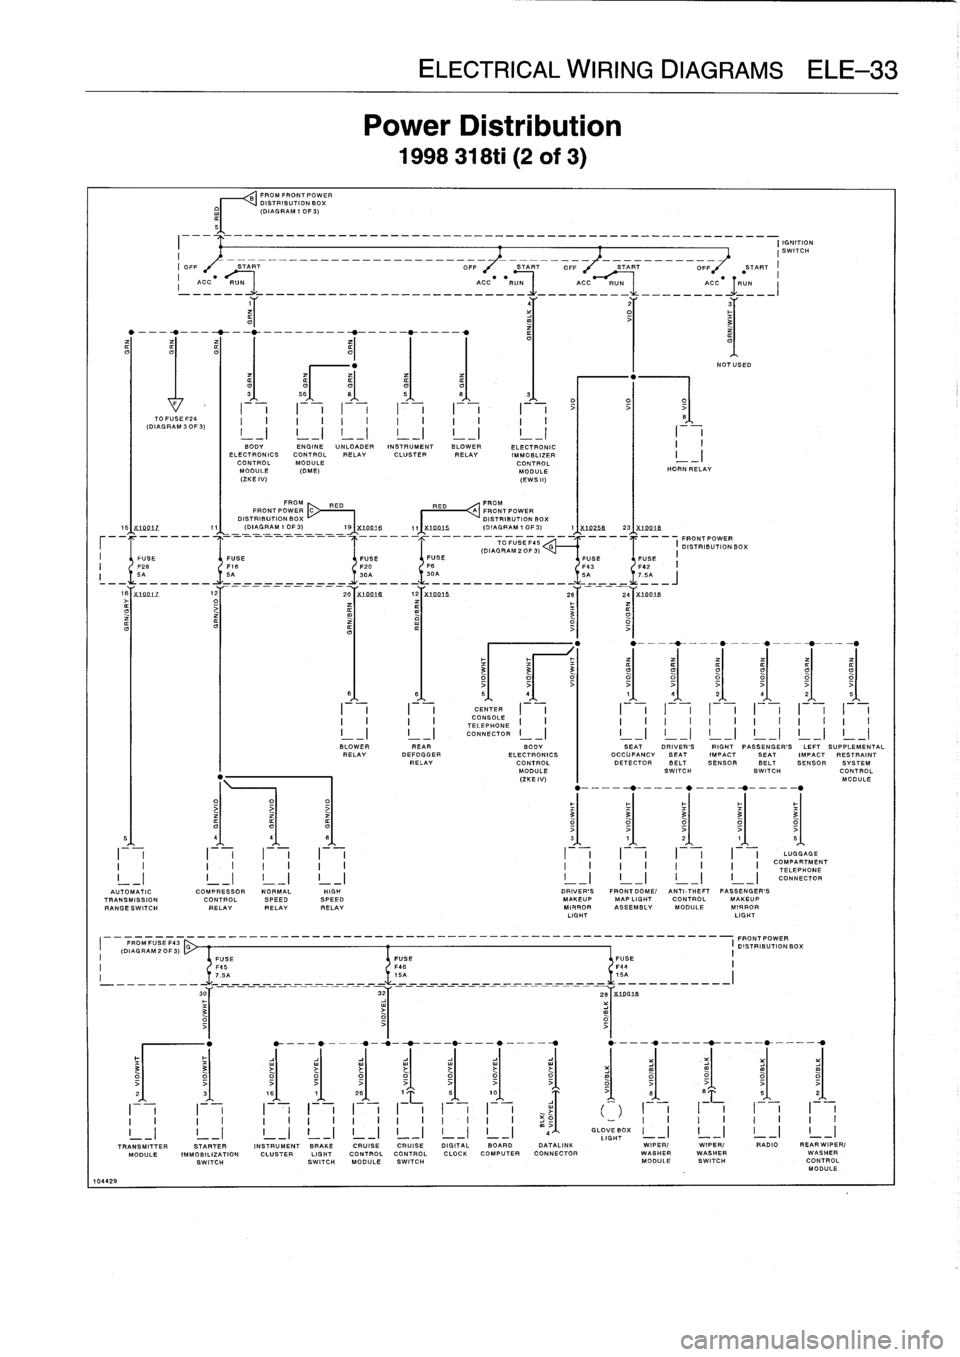 BMW 328i 1995 E36 Owners Guide 
10442
9

II
OFF

TO
FUSE
F14
(DIAGRAM
3
OF
3)

----------------------------------------------------
I
IGNITION
I
SWITCH
START
-----------------
OFF
--
START

	

OFF

	

START
----
OFF

	

START
I

a
